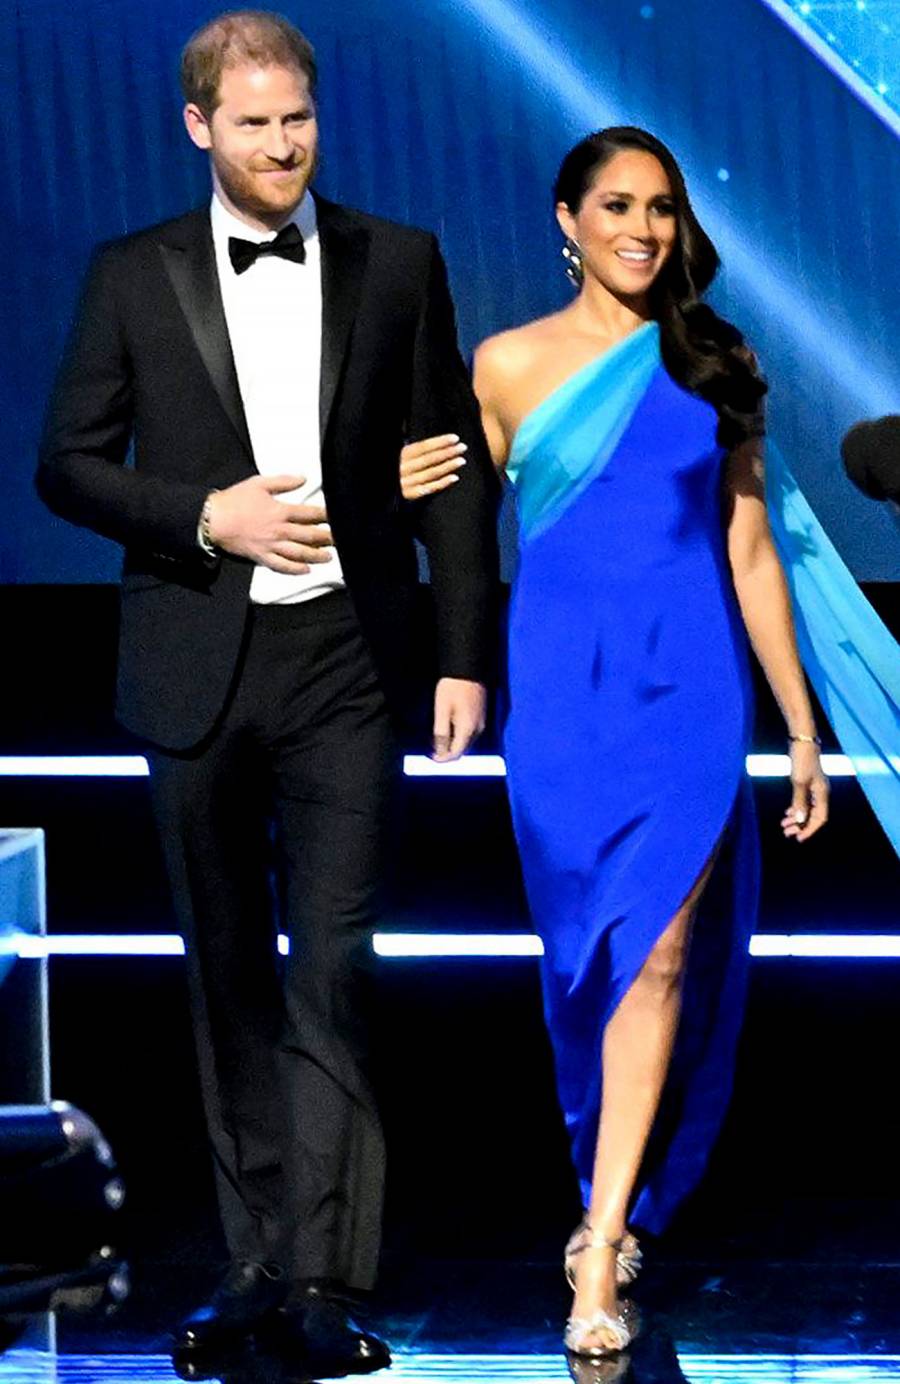 The Significance Behind Meghan Markle’s Sapphire Gown at the 2022 NAACP Awards